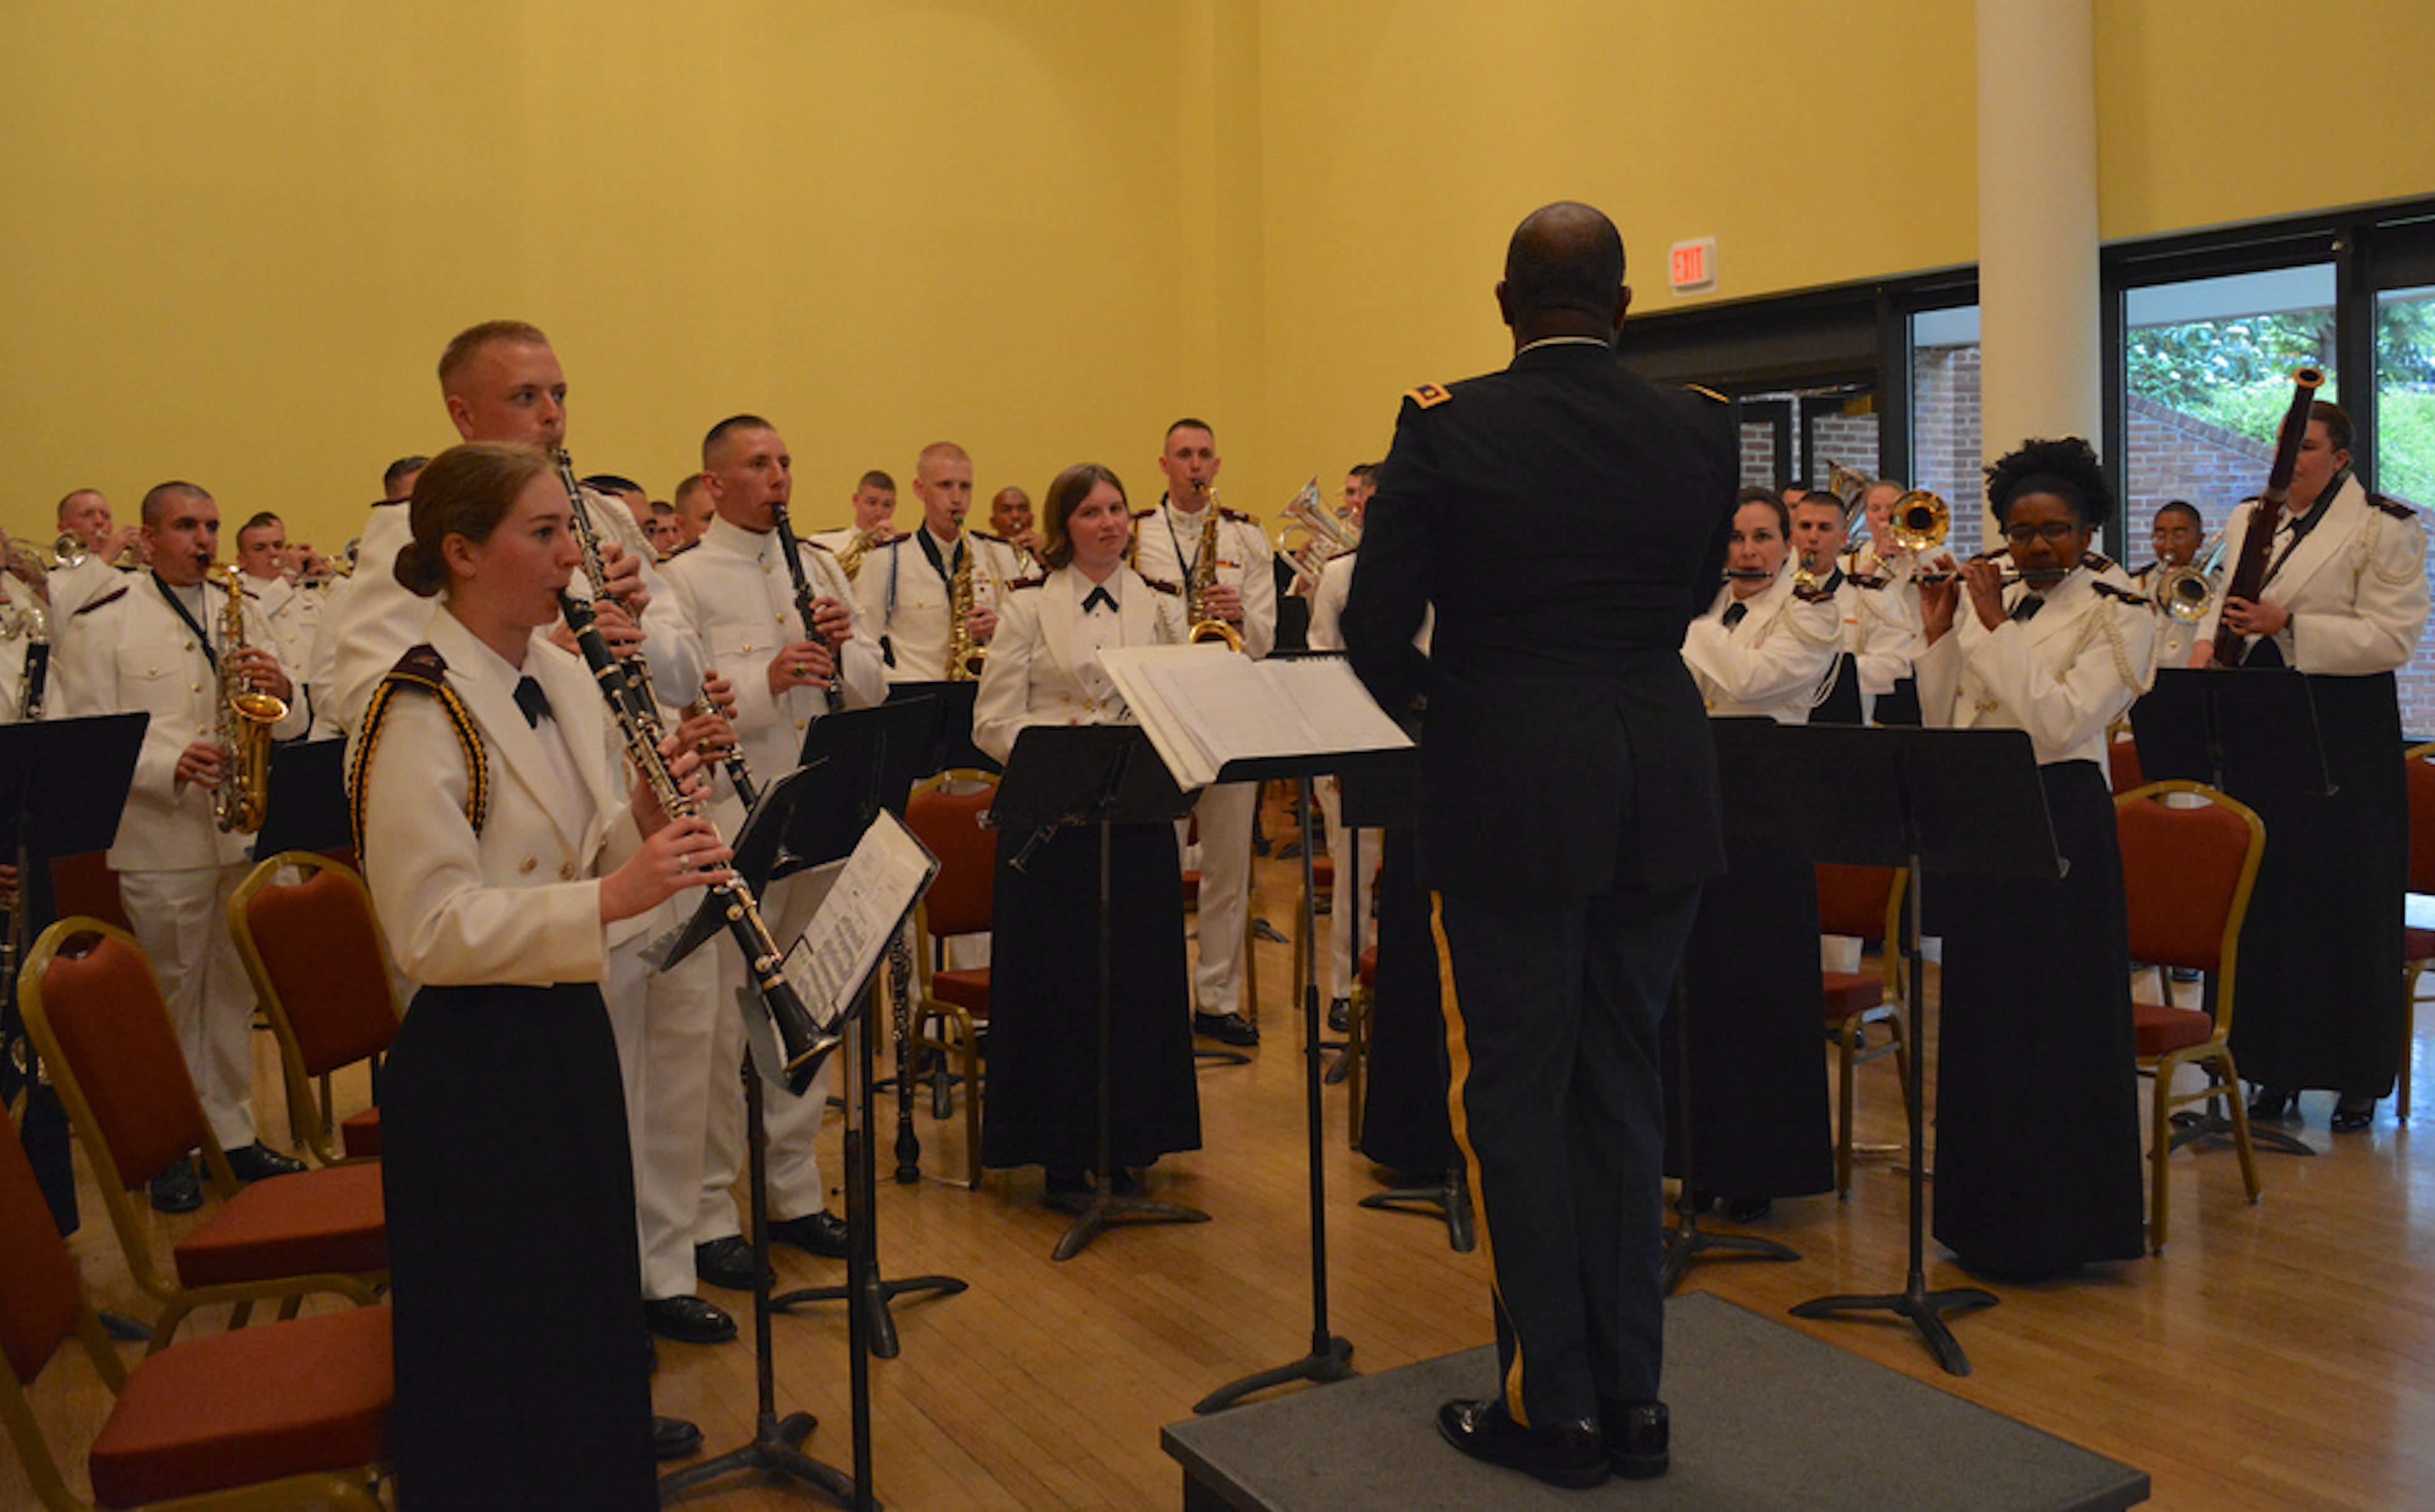 The Virginia Tech Corps of Cadets regimental band, the Highty-Tighties, play at their annual concert band performance last spring in the Old Dominion Ballroom in Squires Student Center.